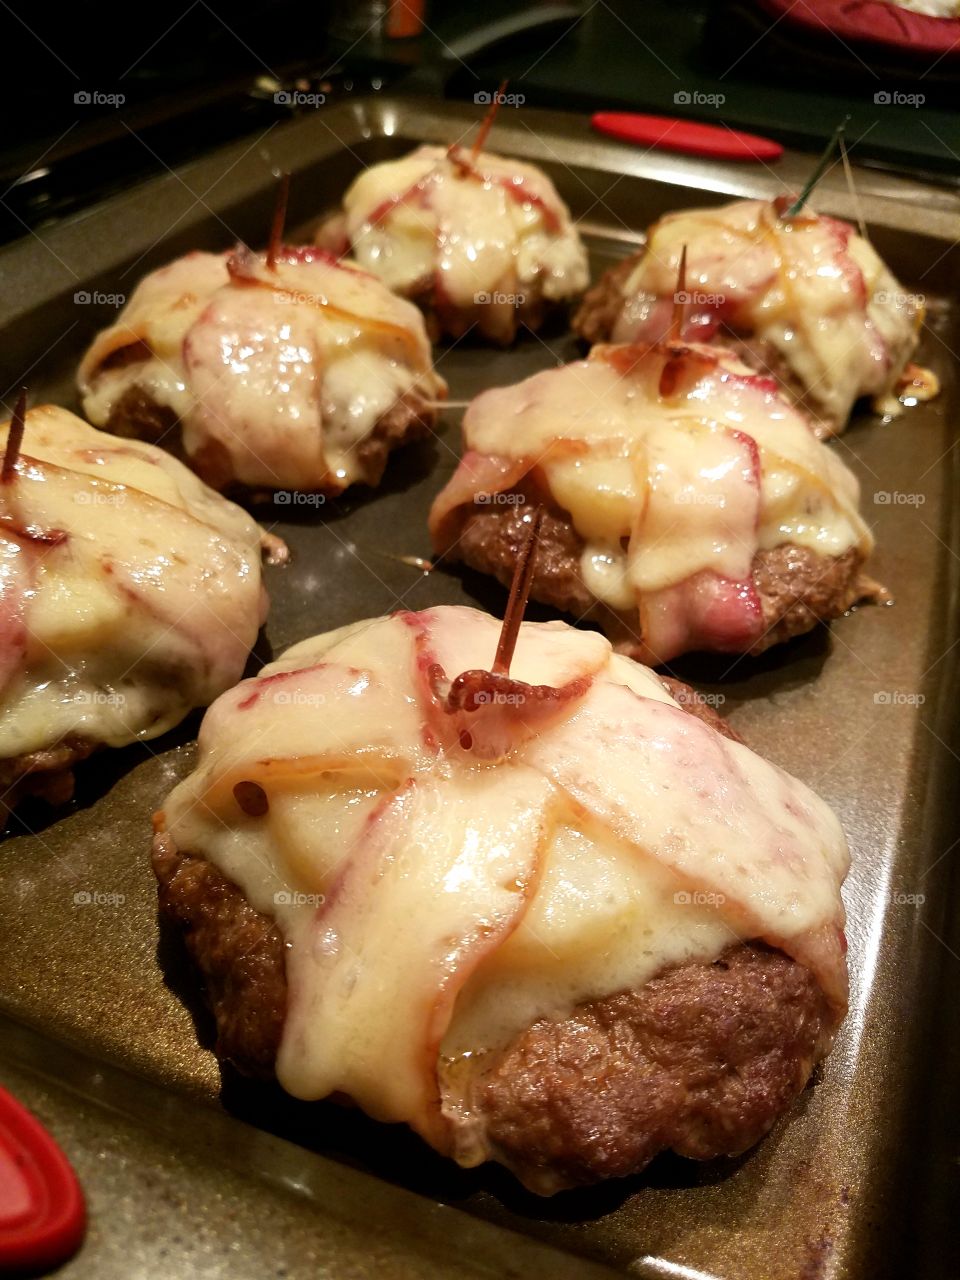 Bacon wrapped burgers with pineapple and BBQ sauce. Baked!